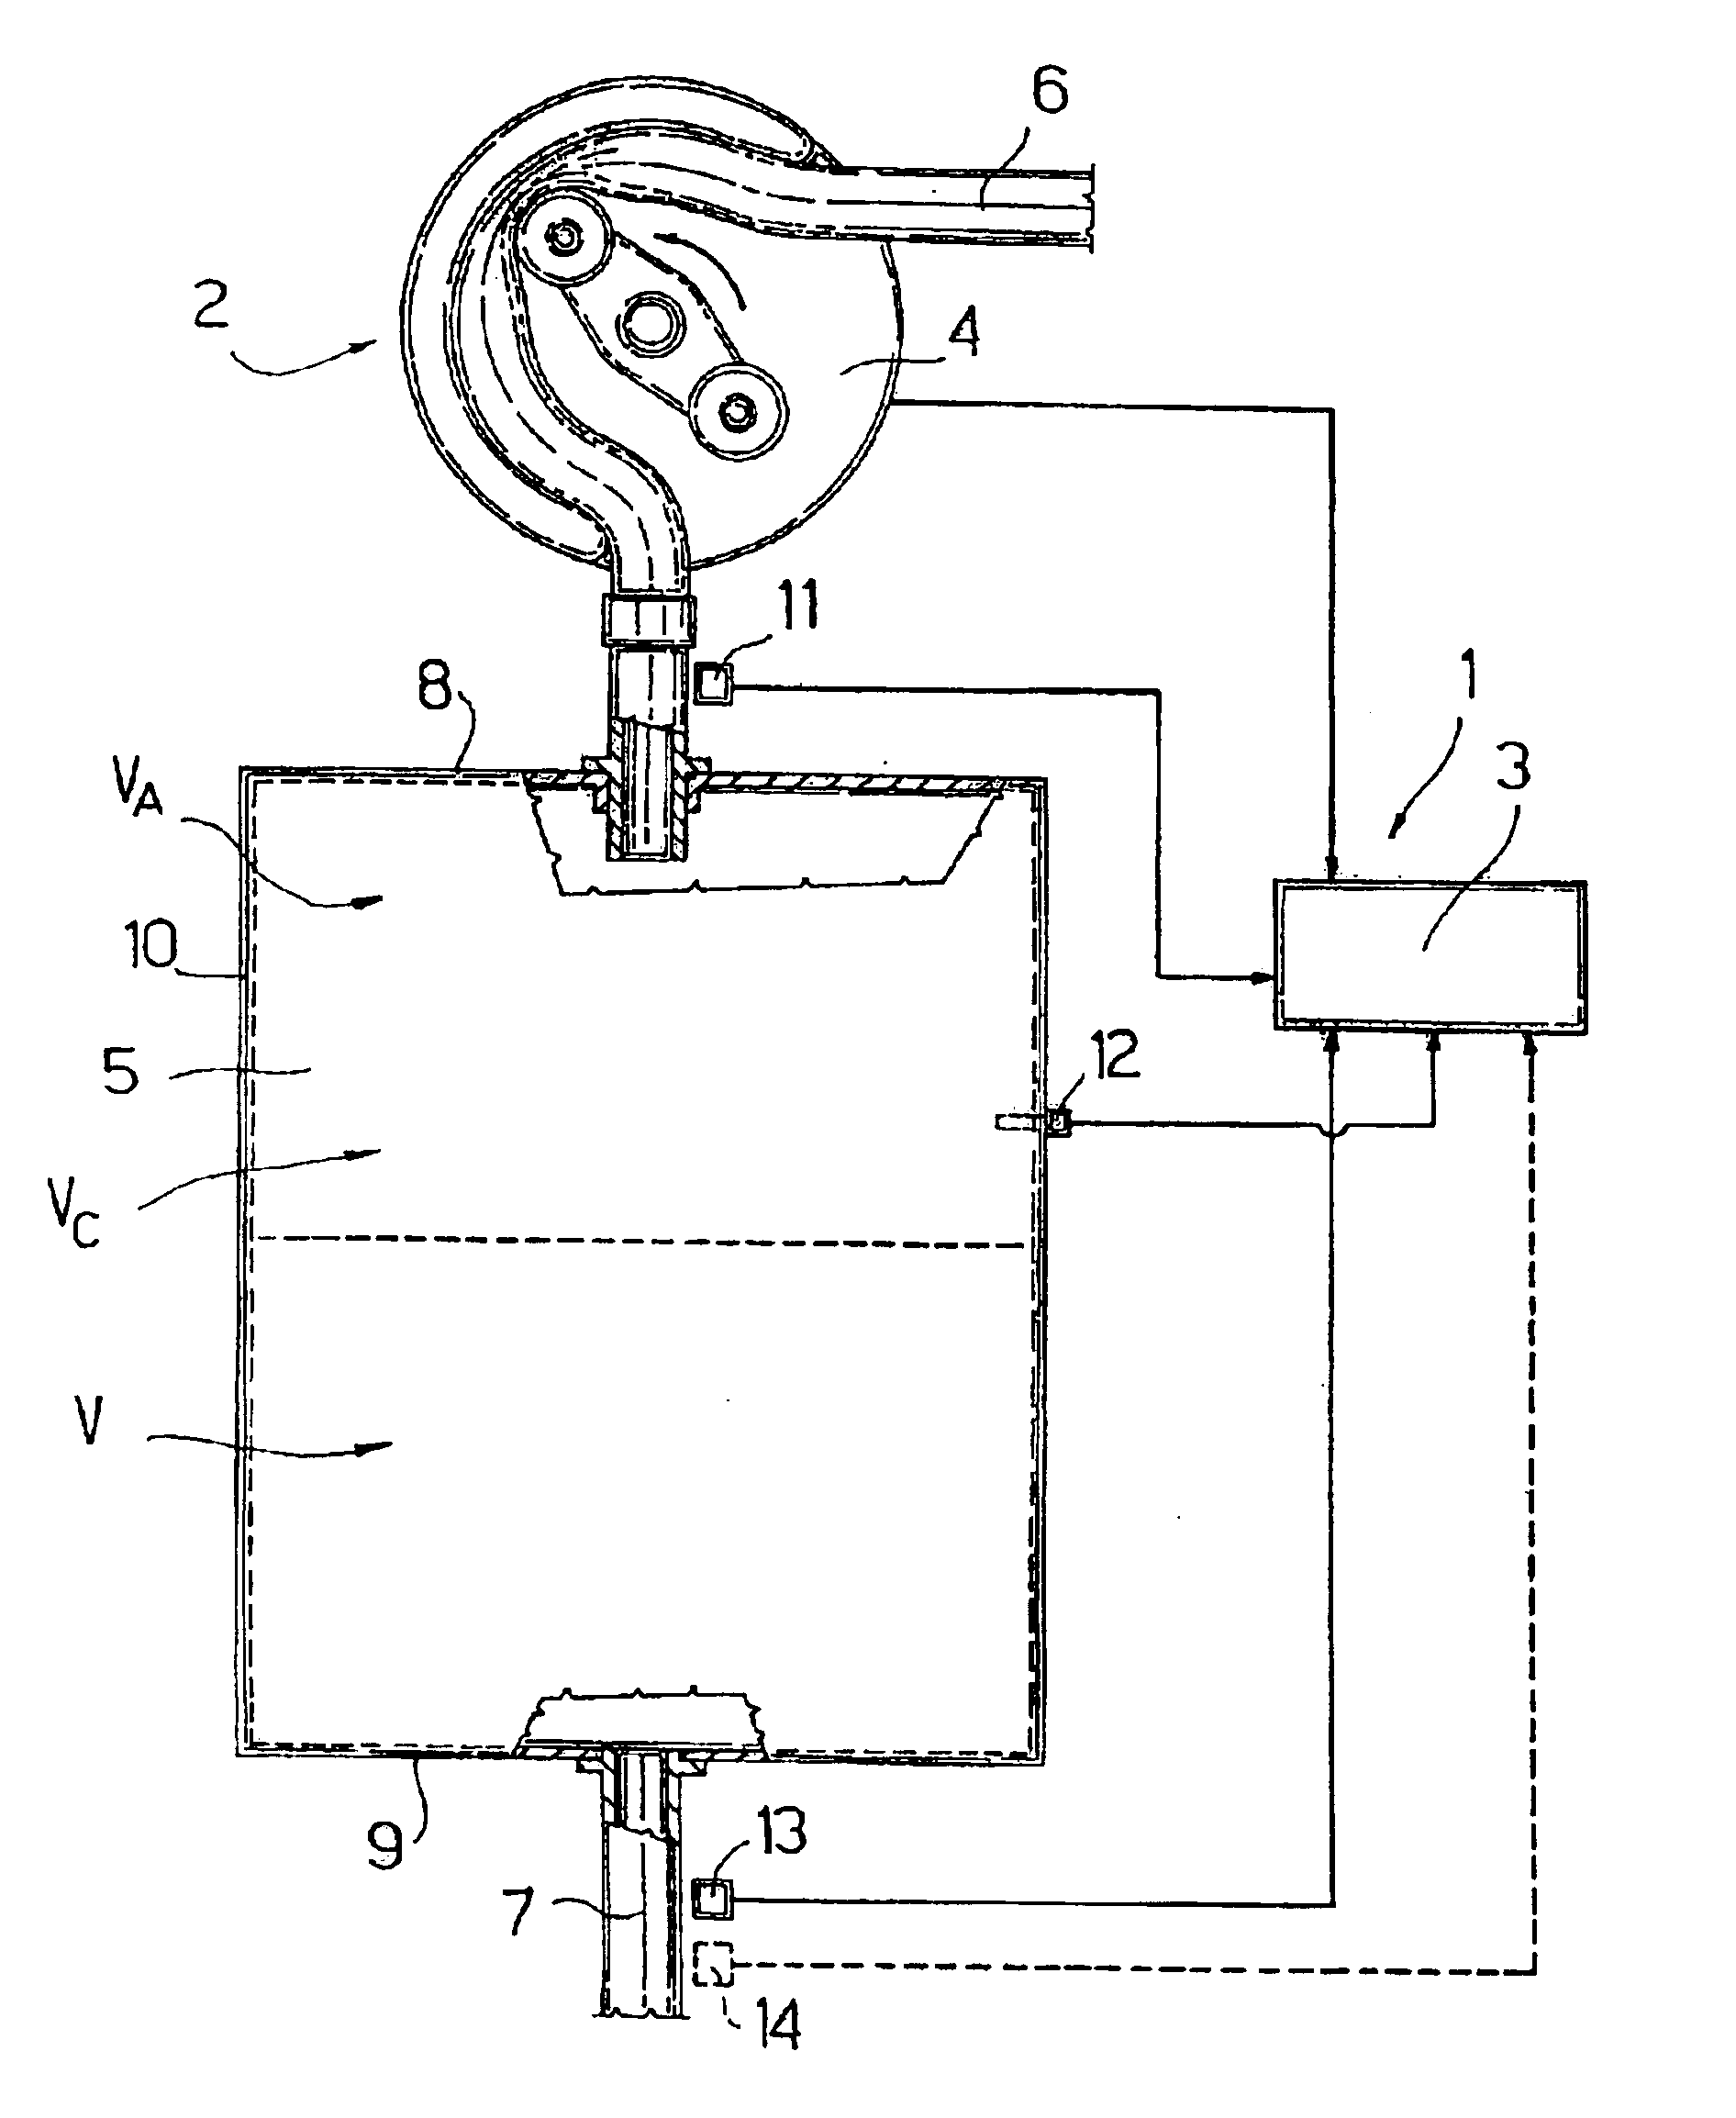 Method for detecting a liquid level in a container in a circuit and a dialysis machine for actuating the method